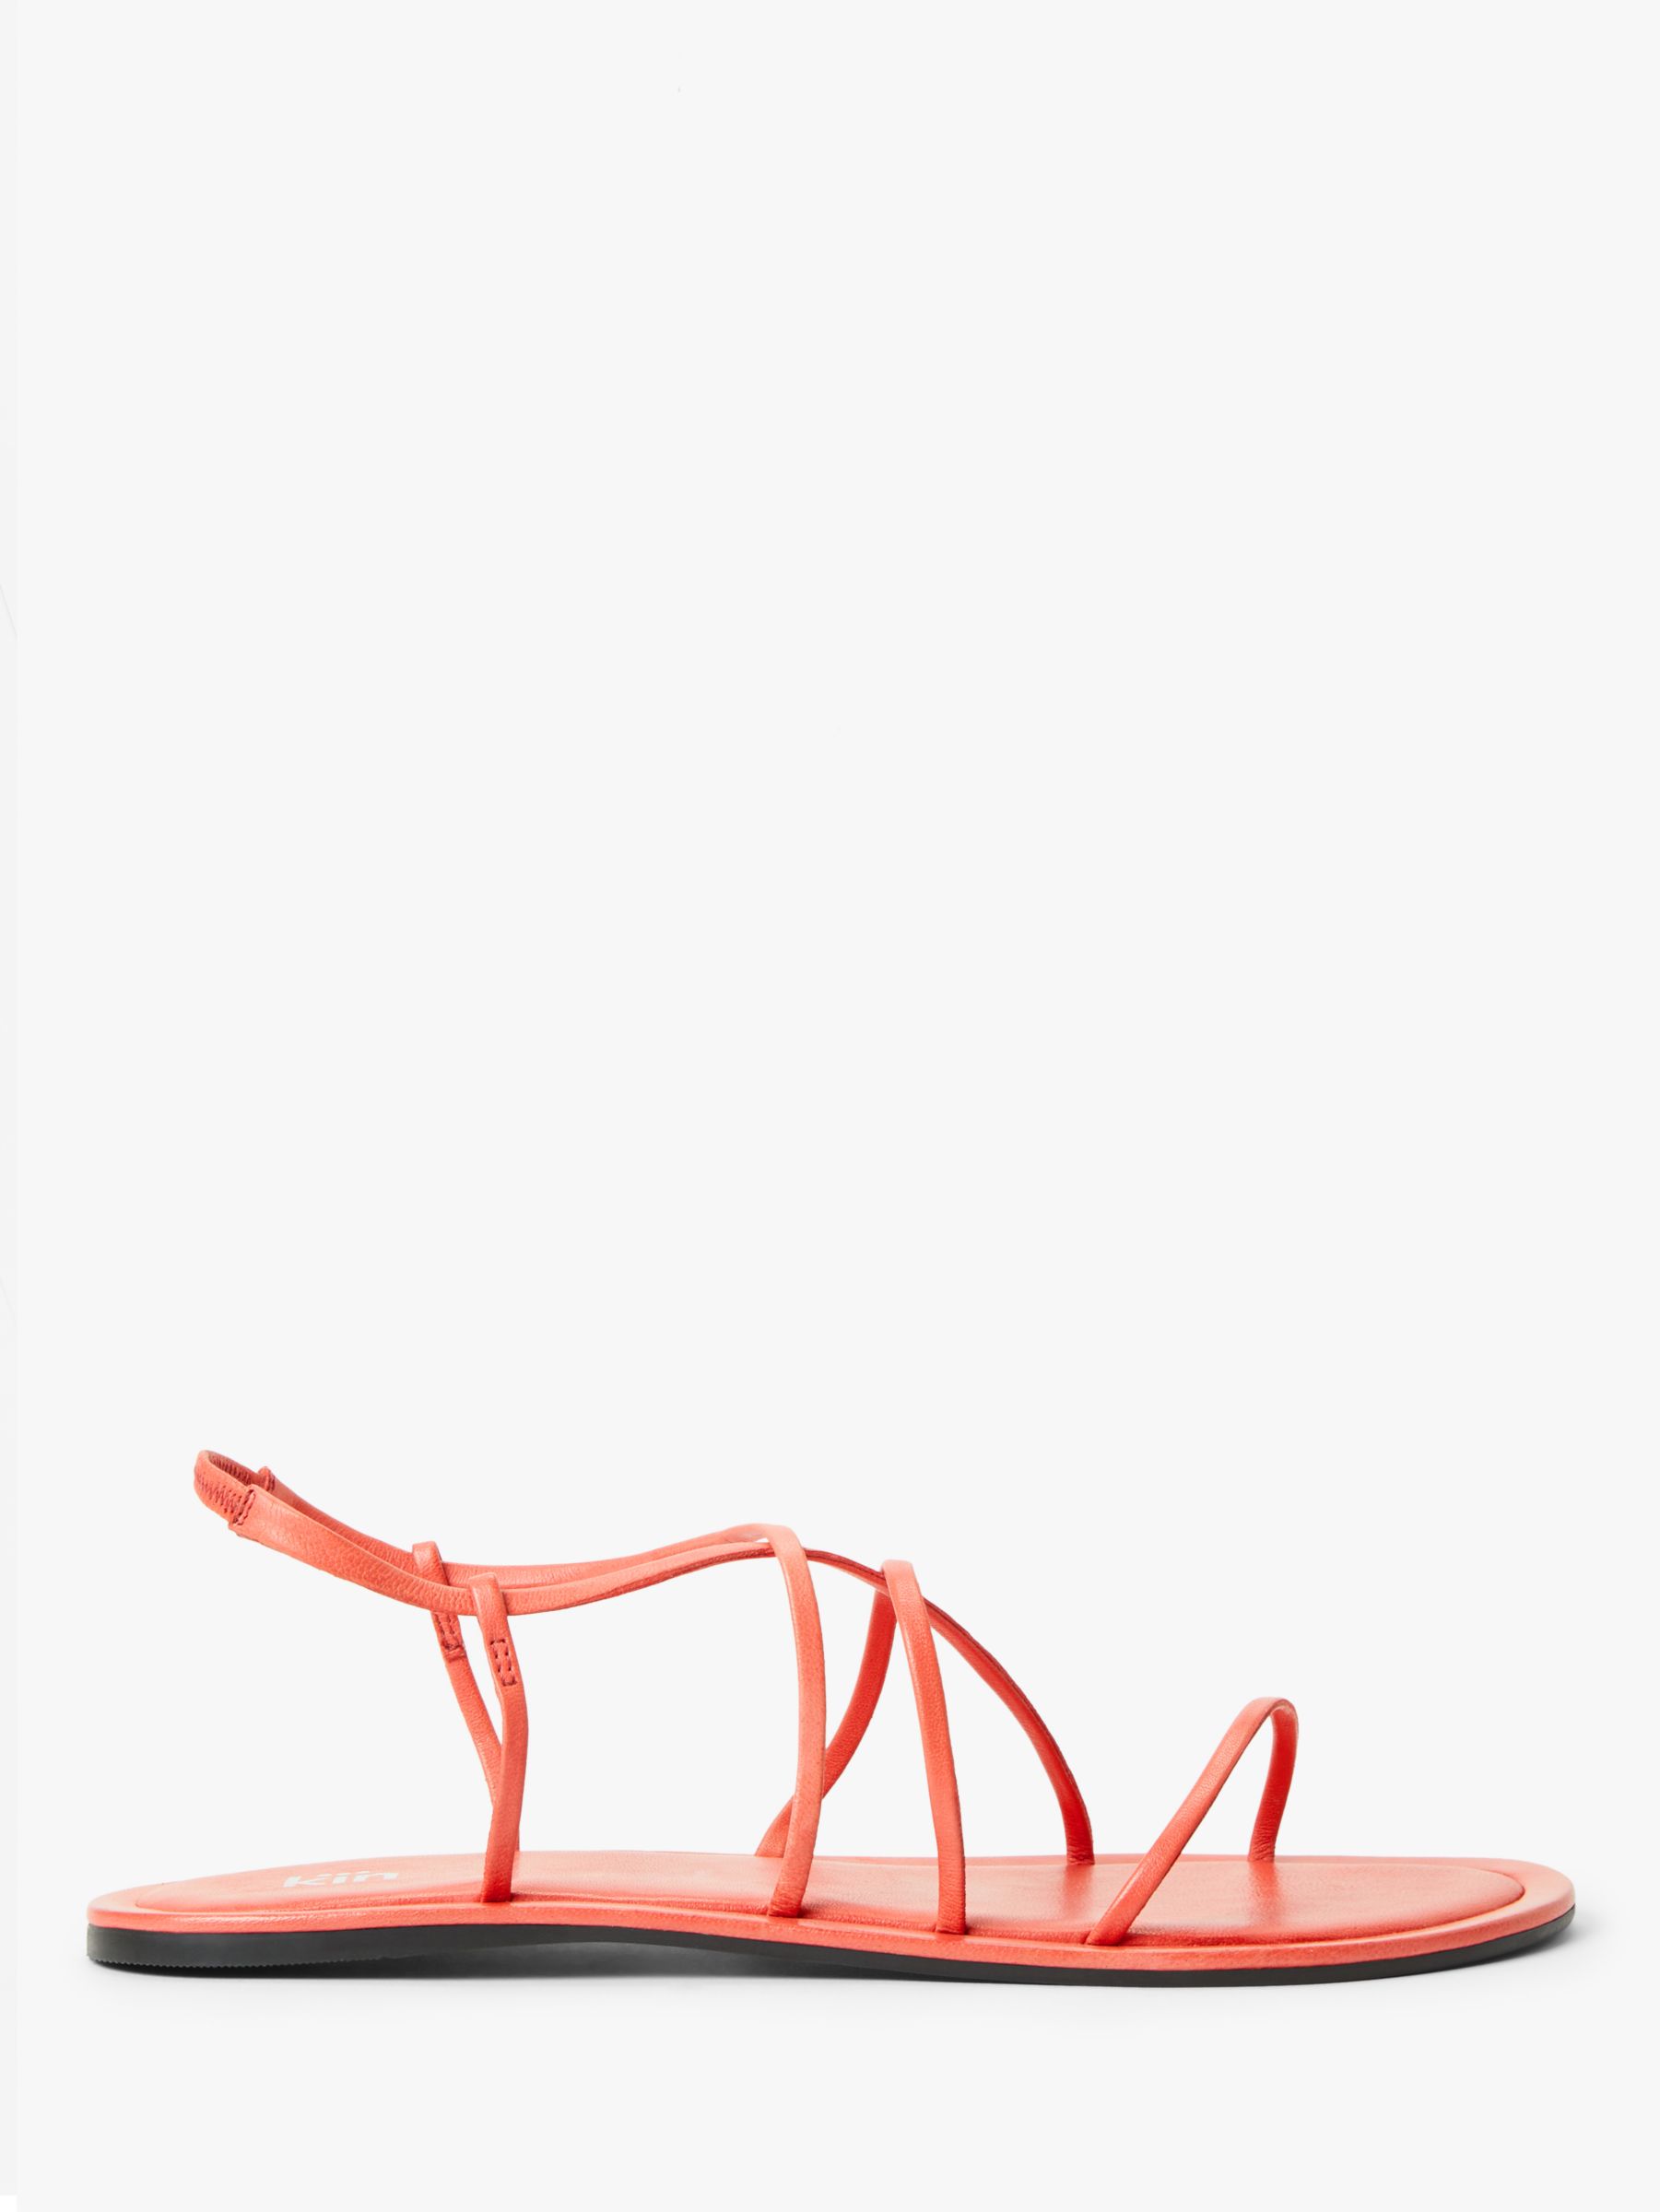 coral strappy sandals